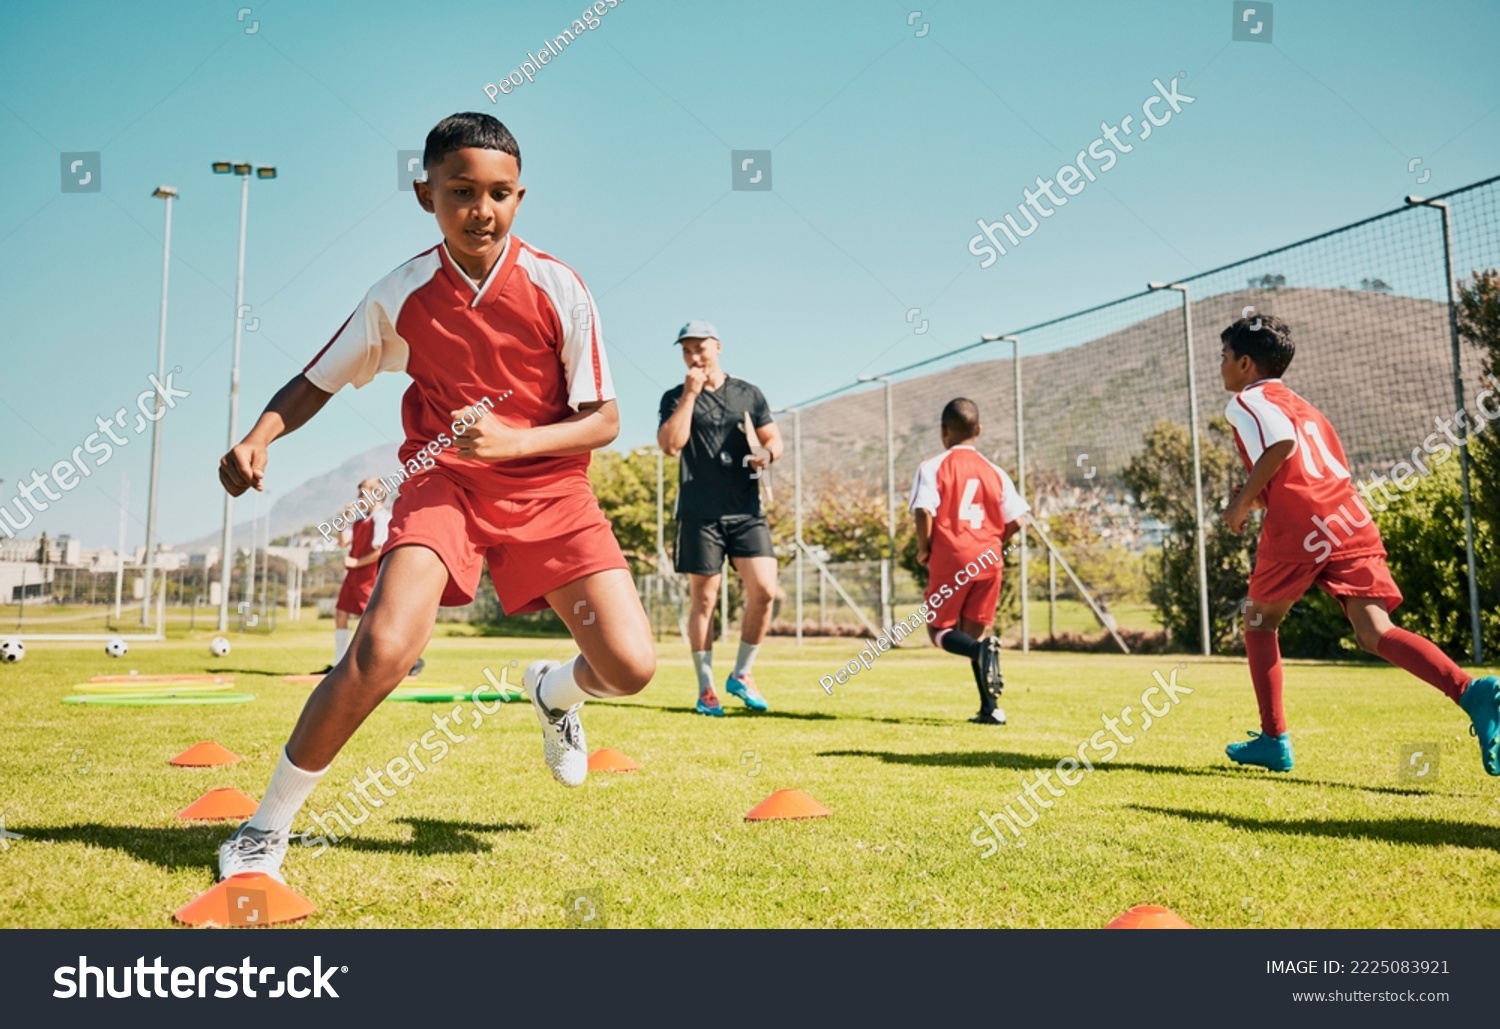 Soccer, children and training or practice for sports competition or game on soccer field for fitness, exercise and energy. Football player, cone and sport with kids coach outdoor for team practice #2225083921